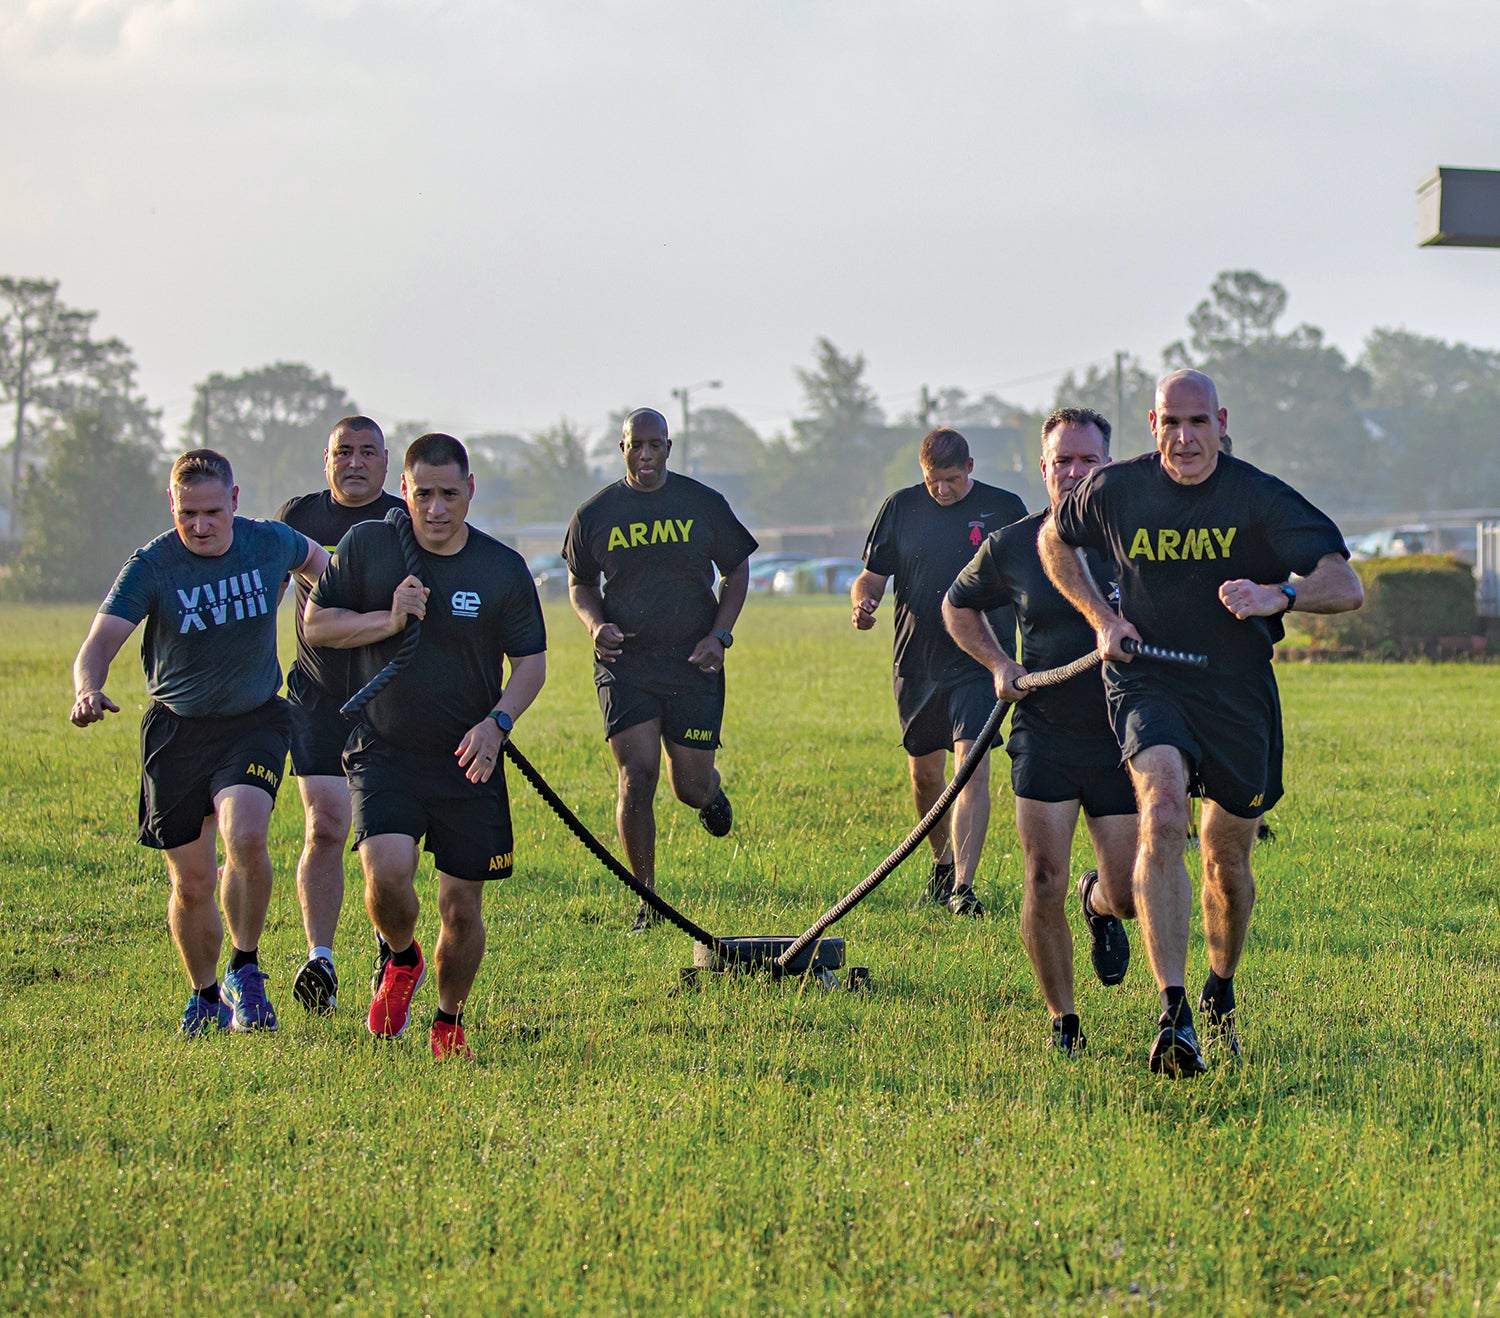 Warrant officers stationed at Fort Liberty, North Carolina, formerly known as Fort Bragg, take part in physical training led by Holistic Health and Fitness trainers. (Credit: U.S. Army/Sgt. Jacob Moir)